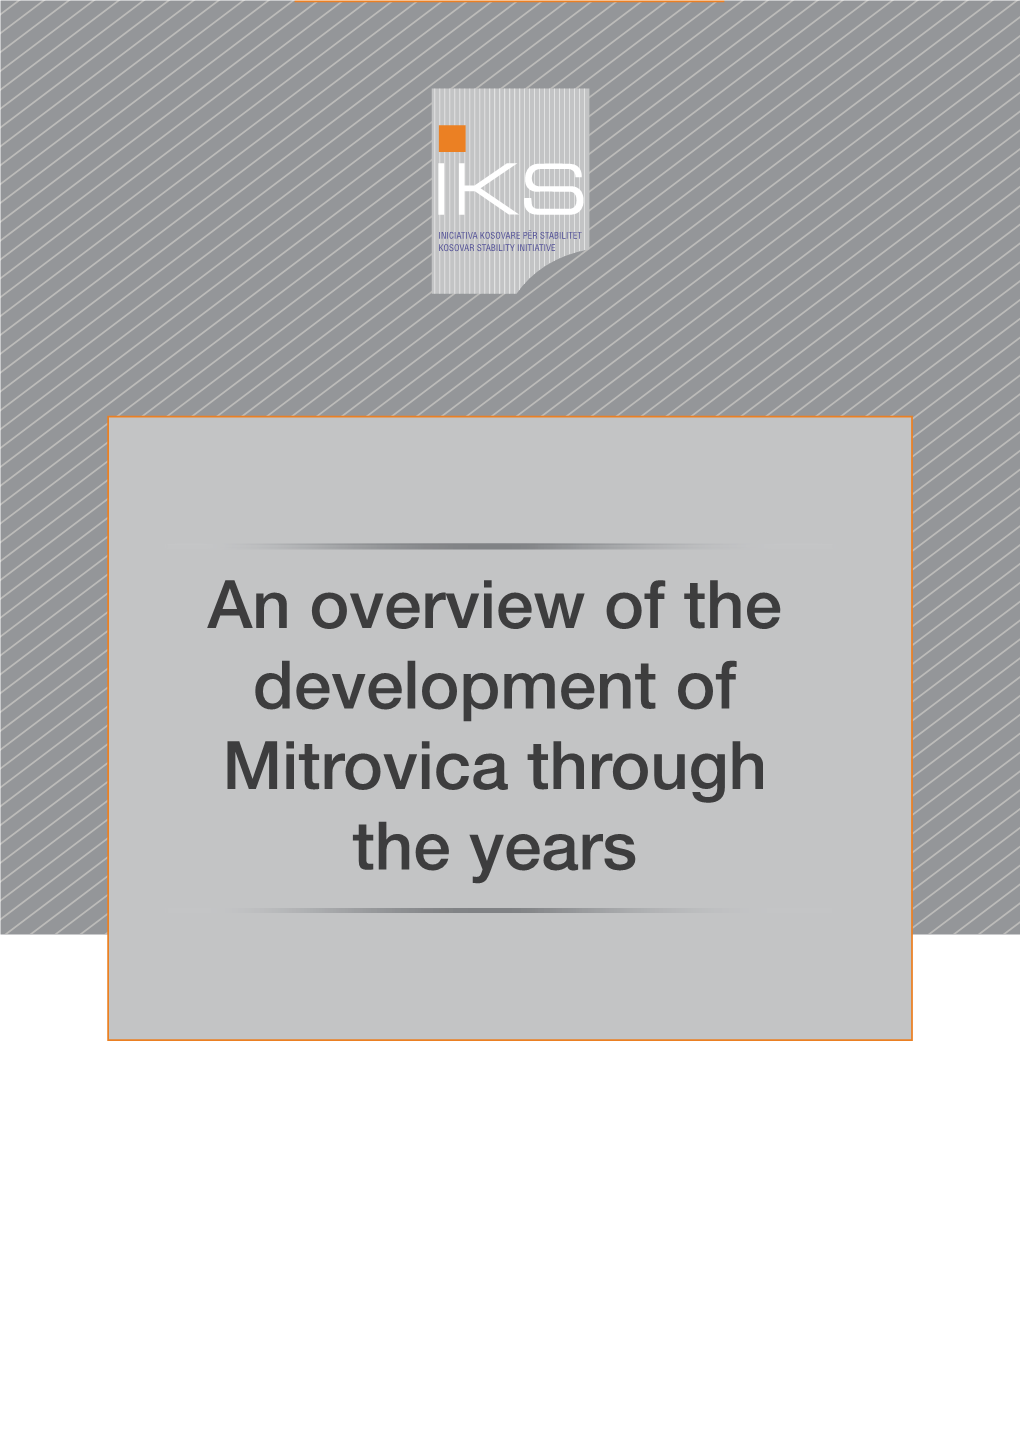 An Overview of the Development of Mitrovica Through the Years This Publication Has Been Supported by the Think Tank Fund of Open Society Foundations